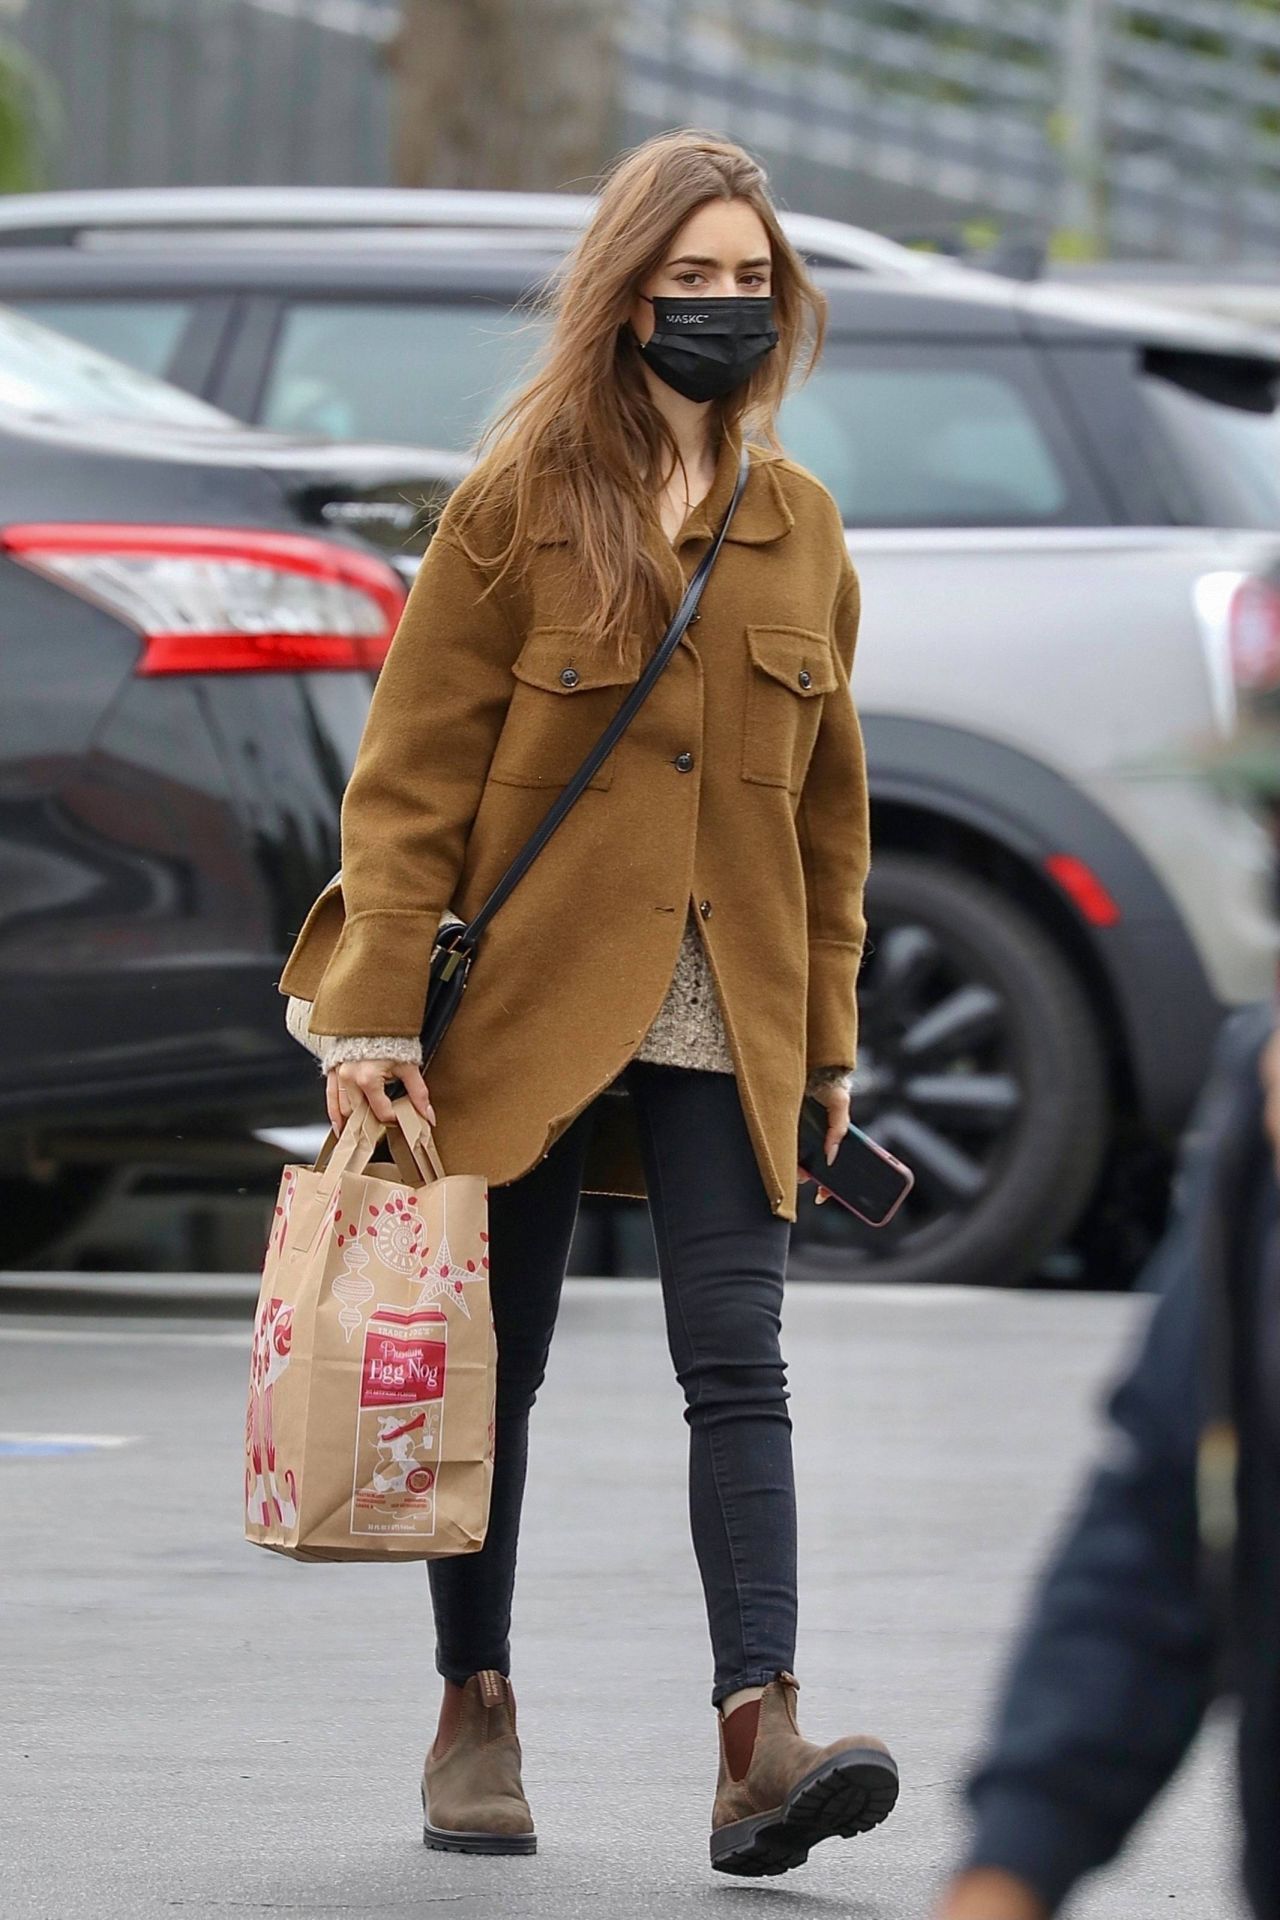 Lily Collins - Shopping at Trader Joe s in LA 01 28 2021 